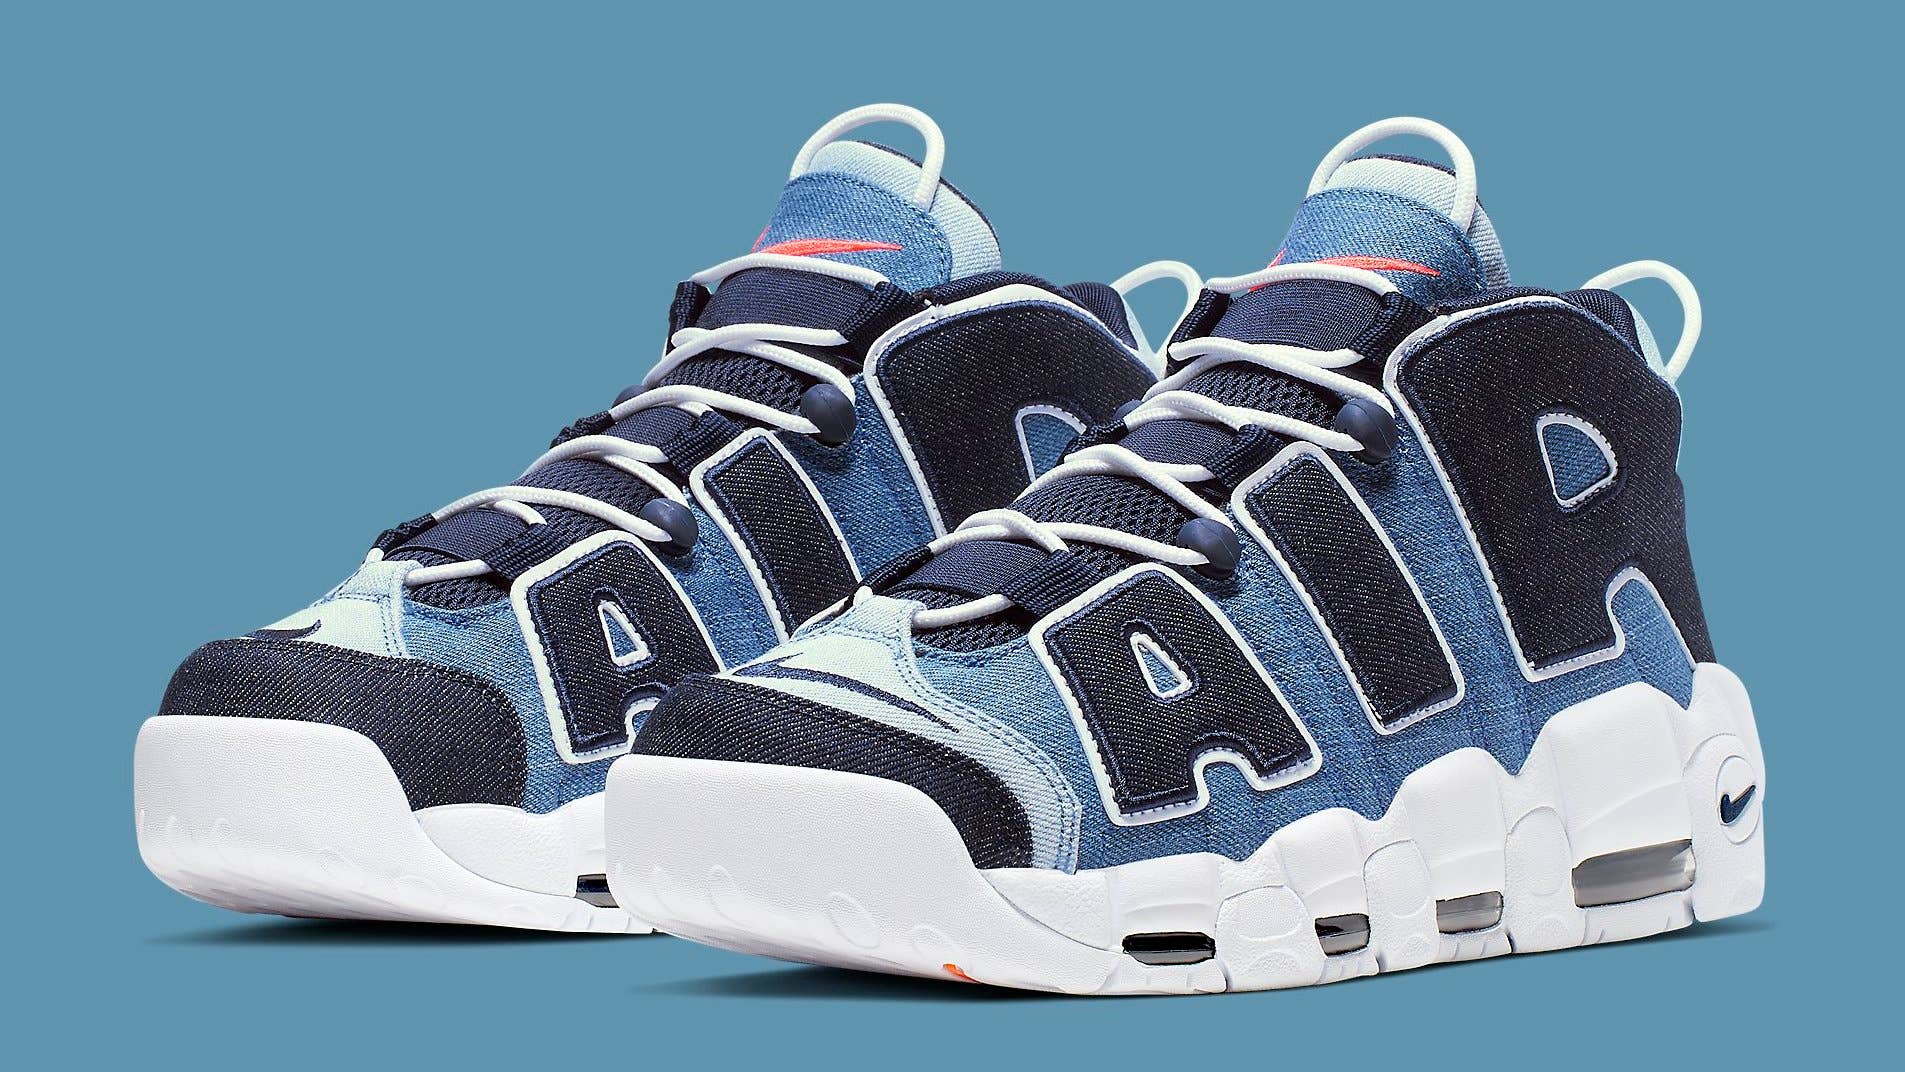 A Better Look at the 'Denim' Nike Air More Uptempo